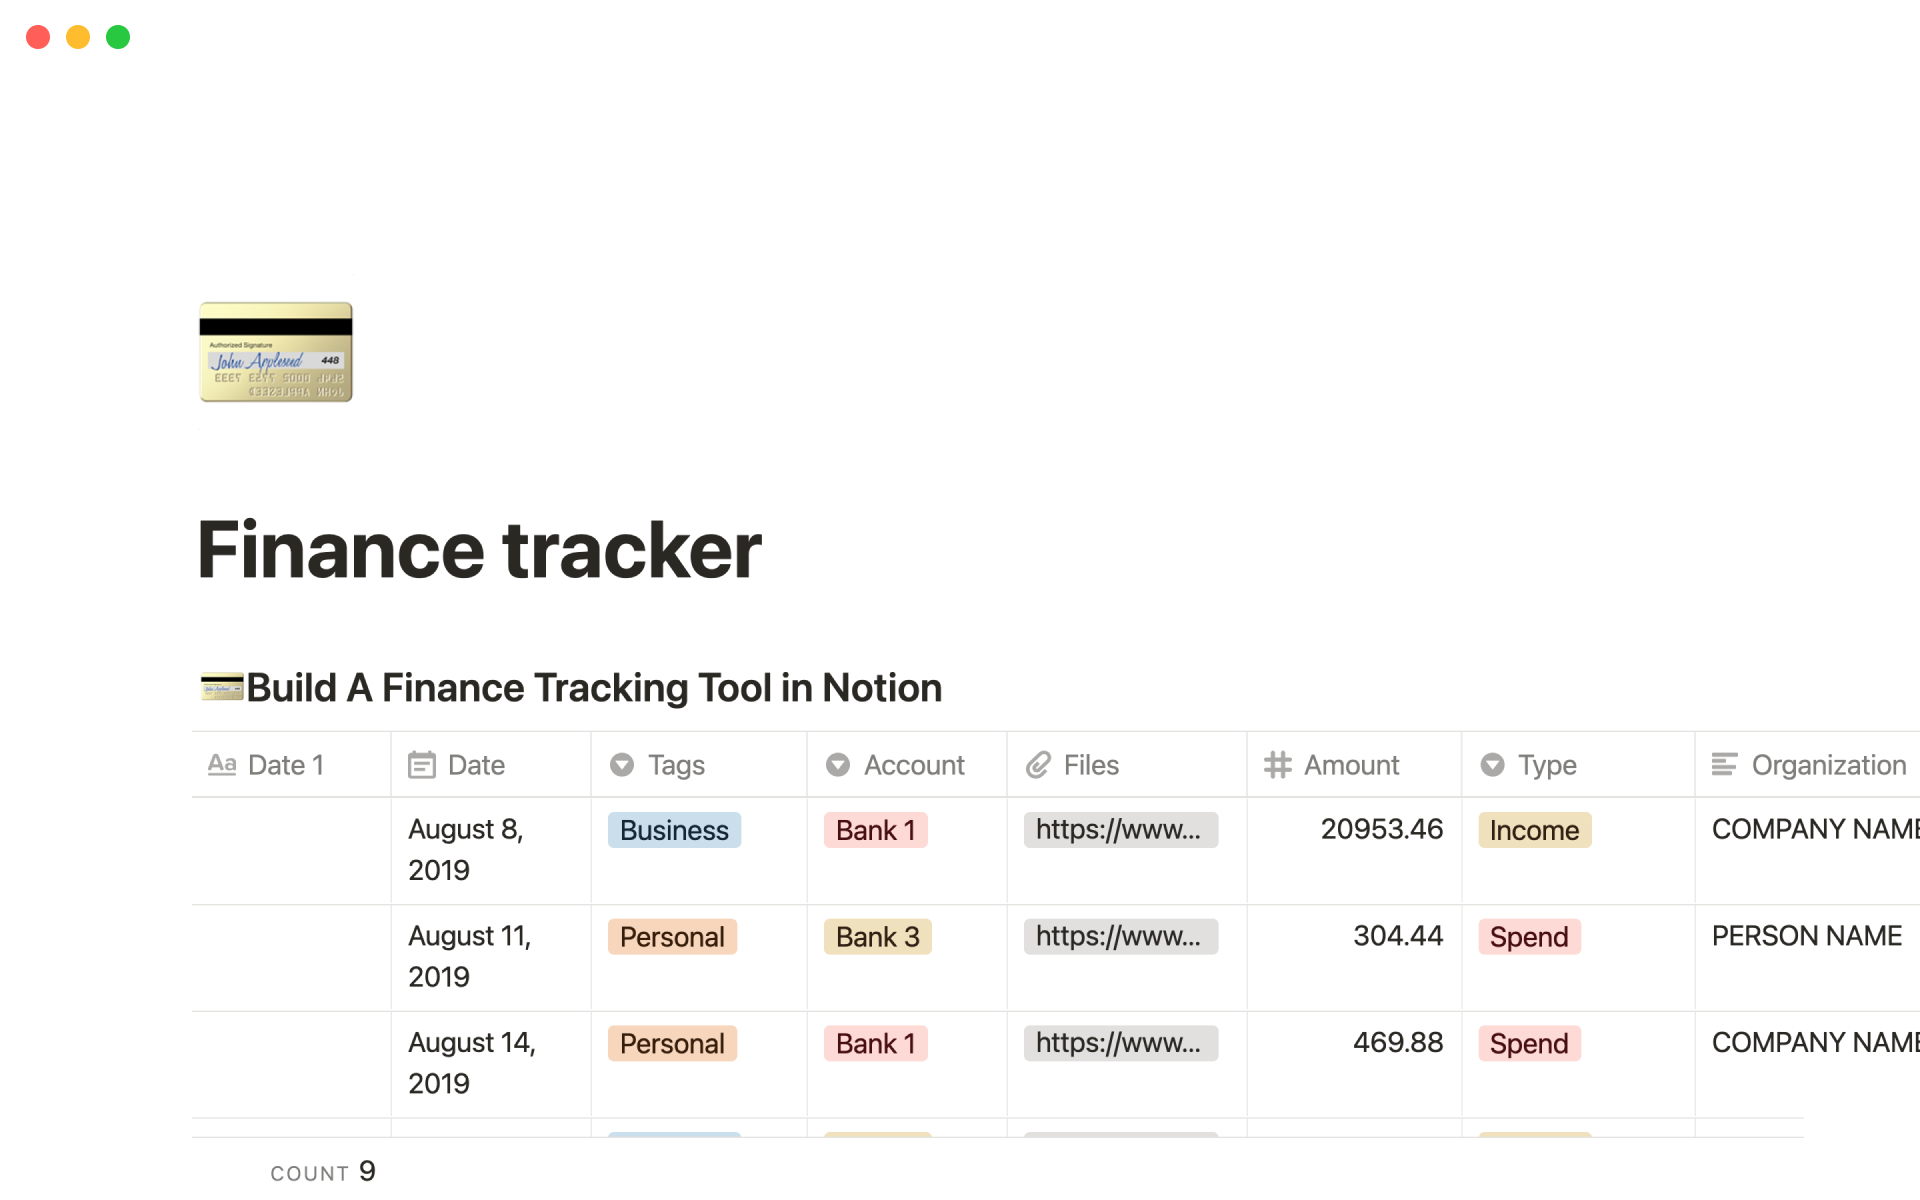 The desktop image for the Finance tracker template